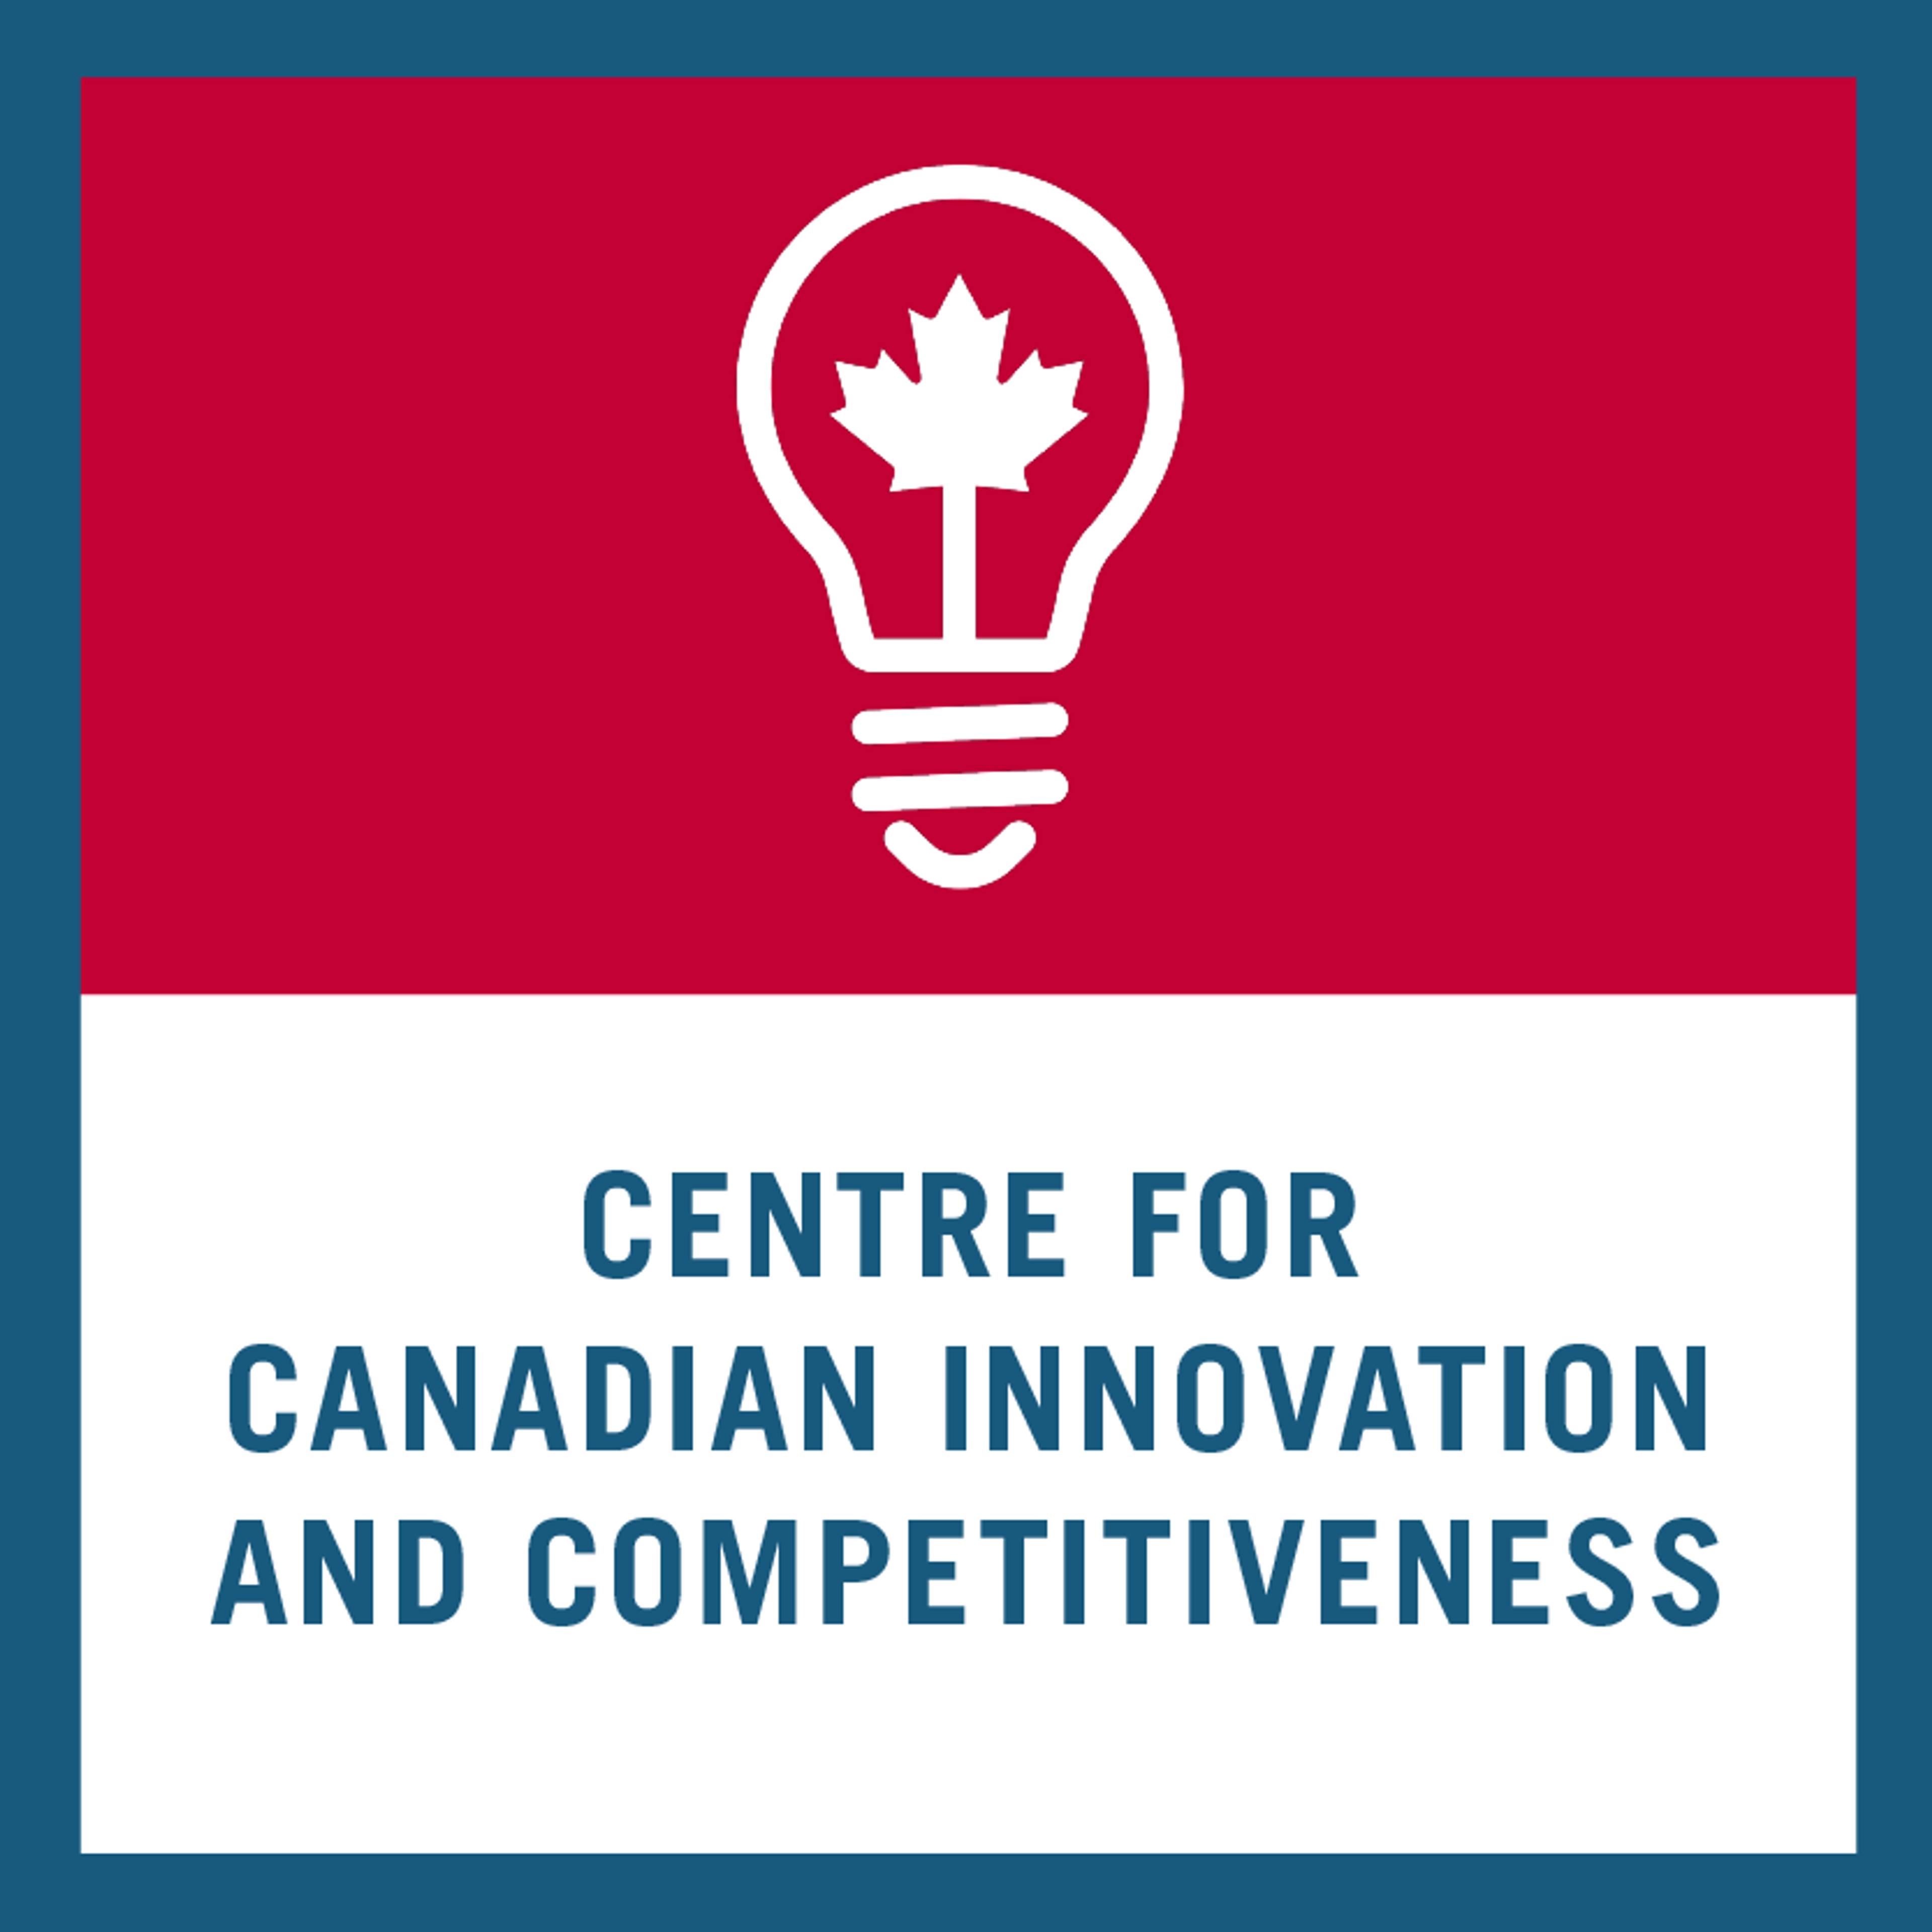 Assessing Canadian Innovation, Productivity, and Competitiveness